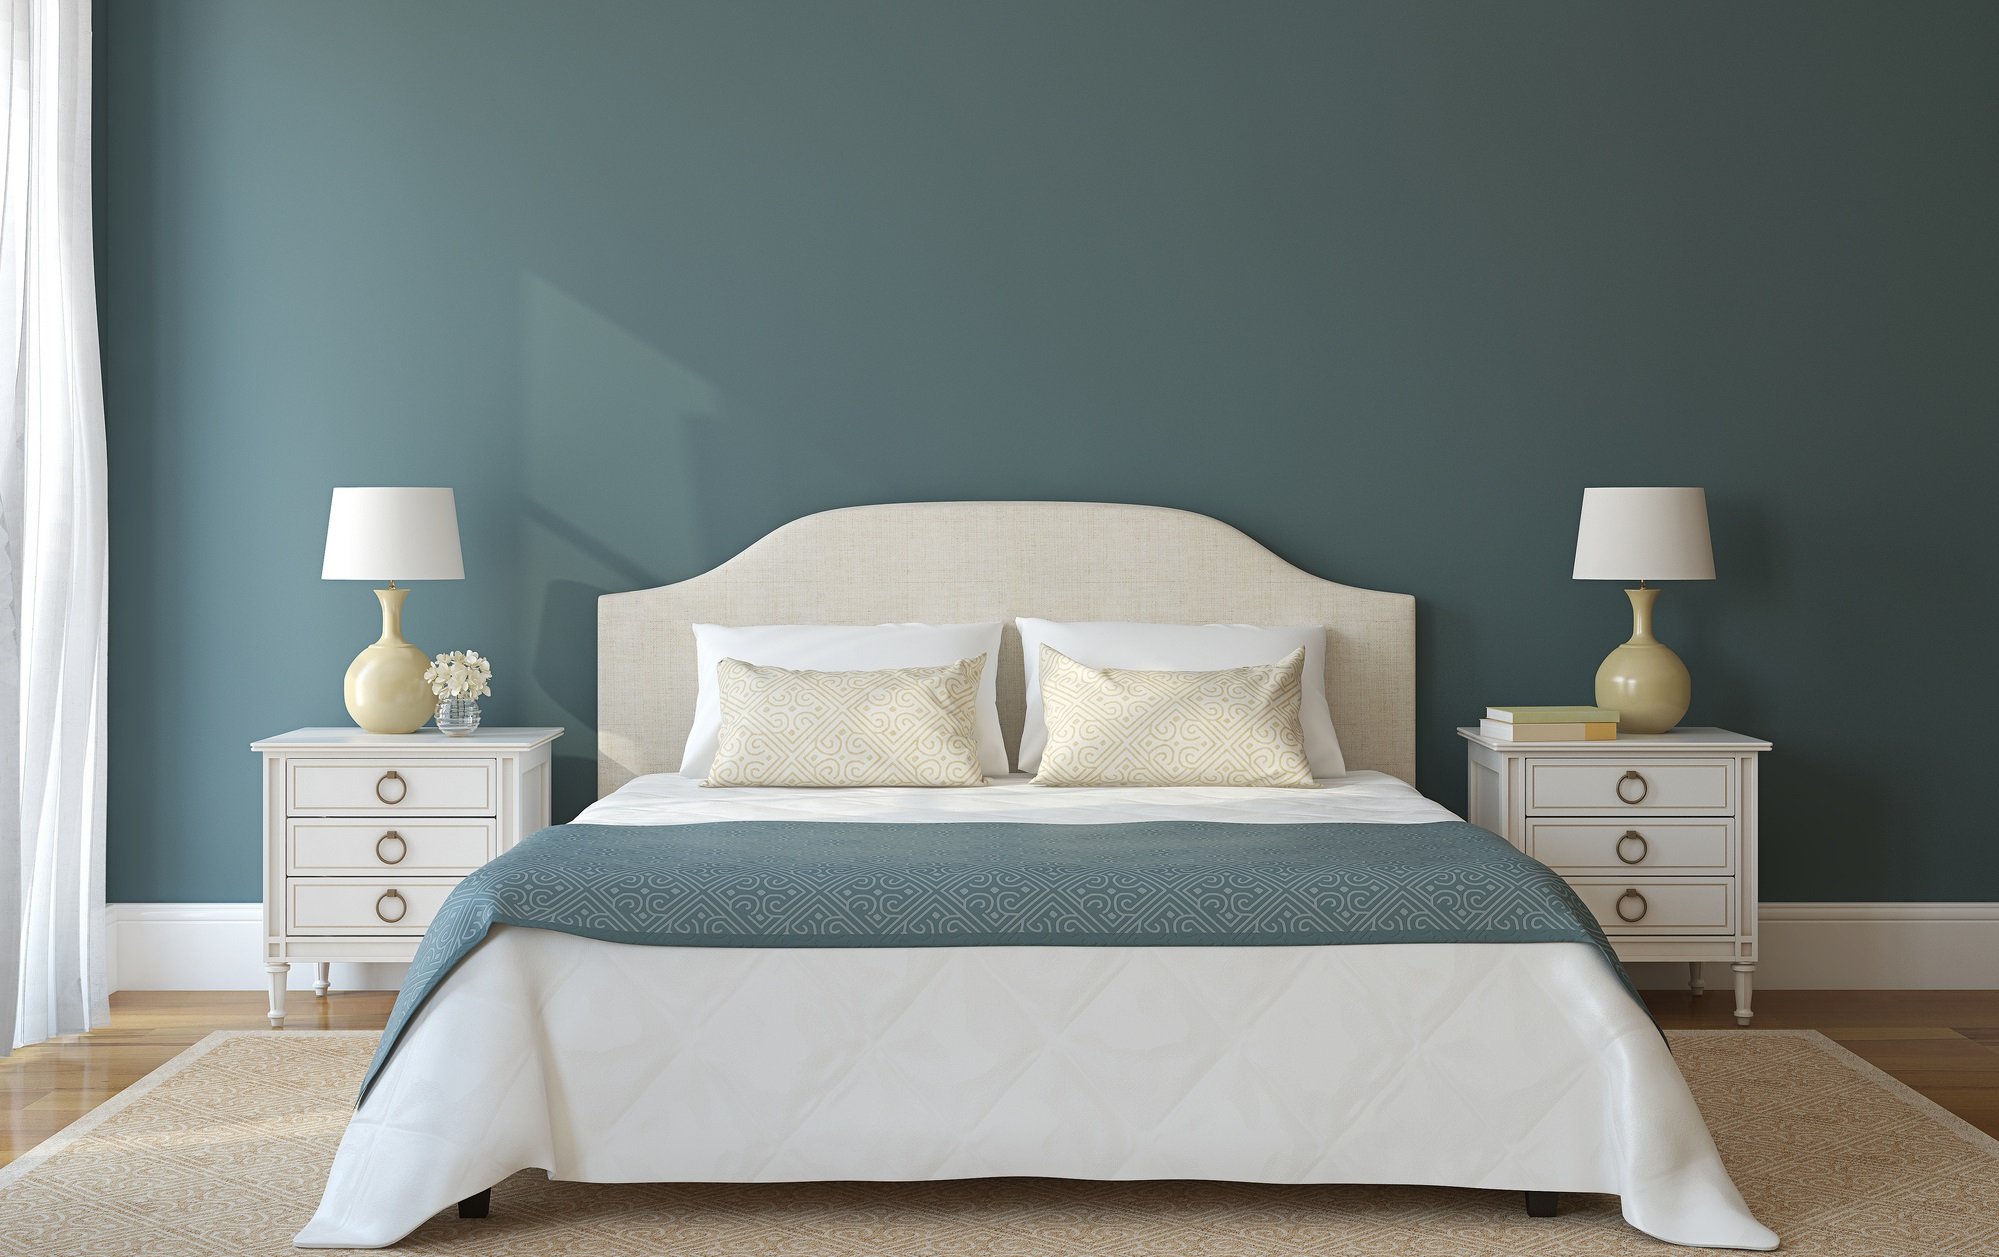 A bedroom with blue-sage-colored walls